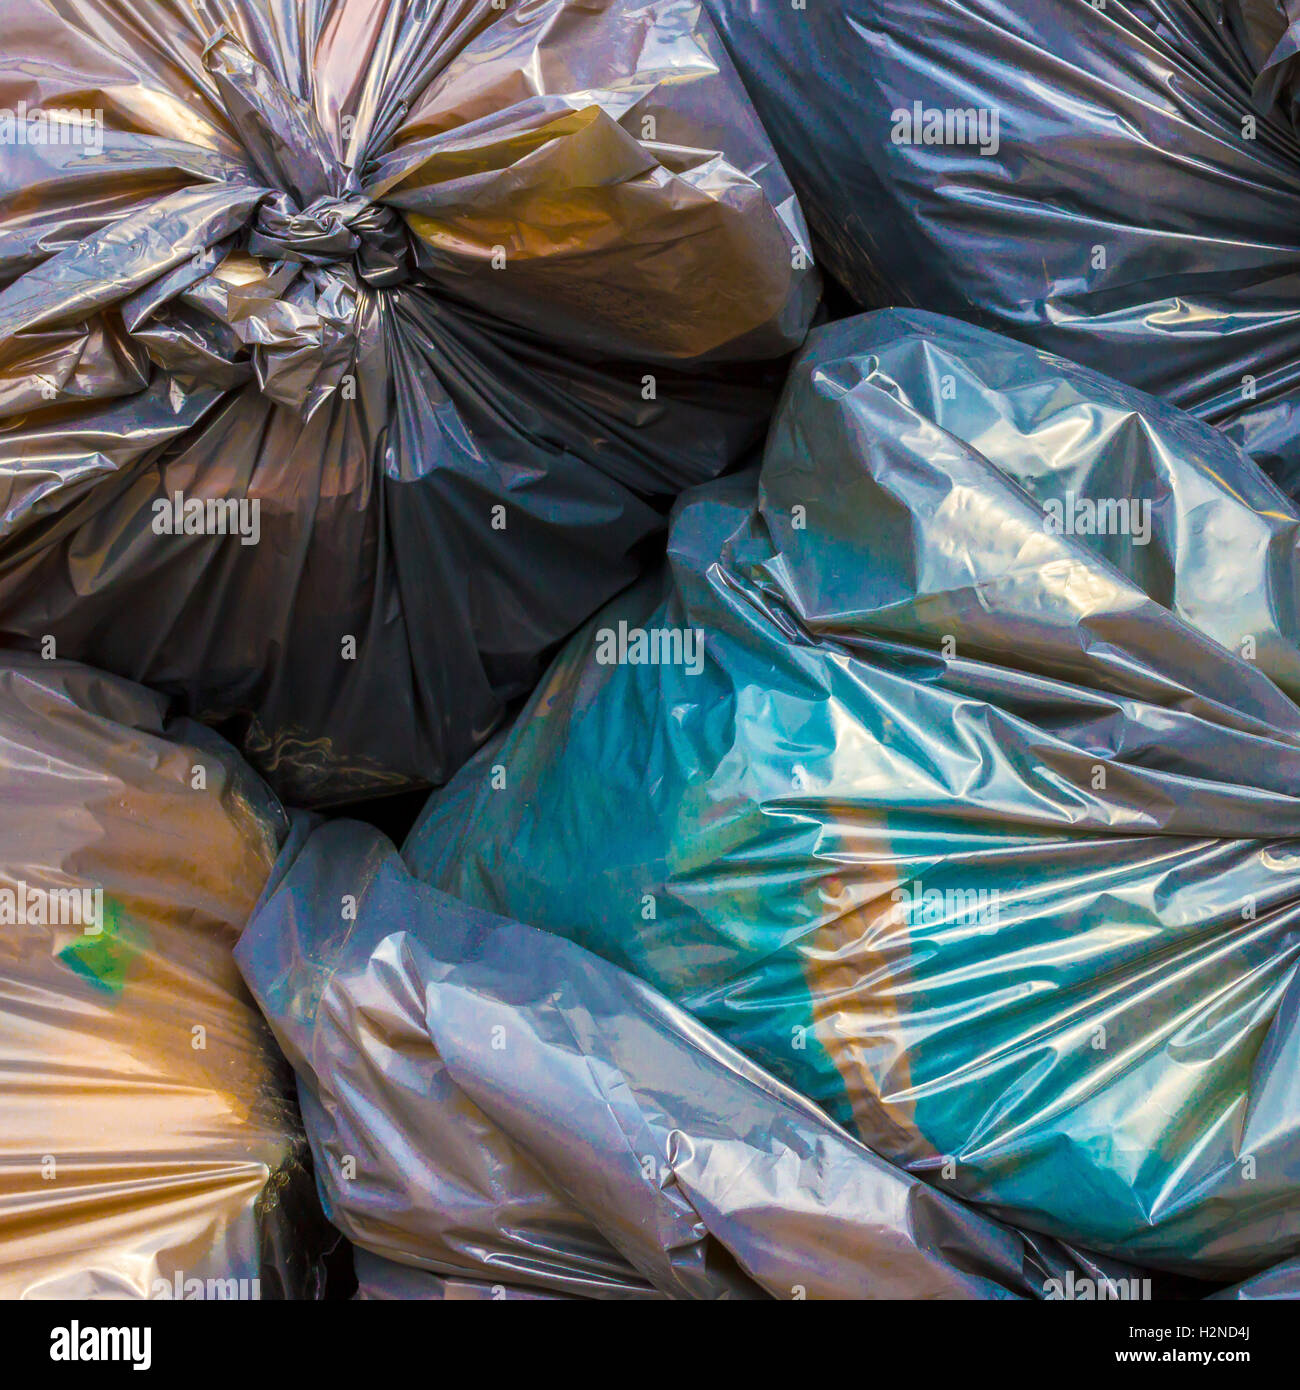 https://c8.alamy.com/comp/H2ND4J/pile-of-garbage-and-waste-in-colorfull-bags-H2ND4J.jpg